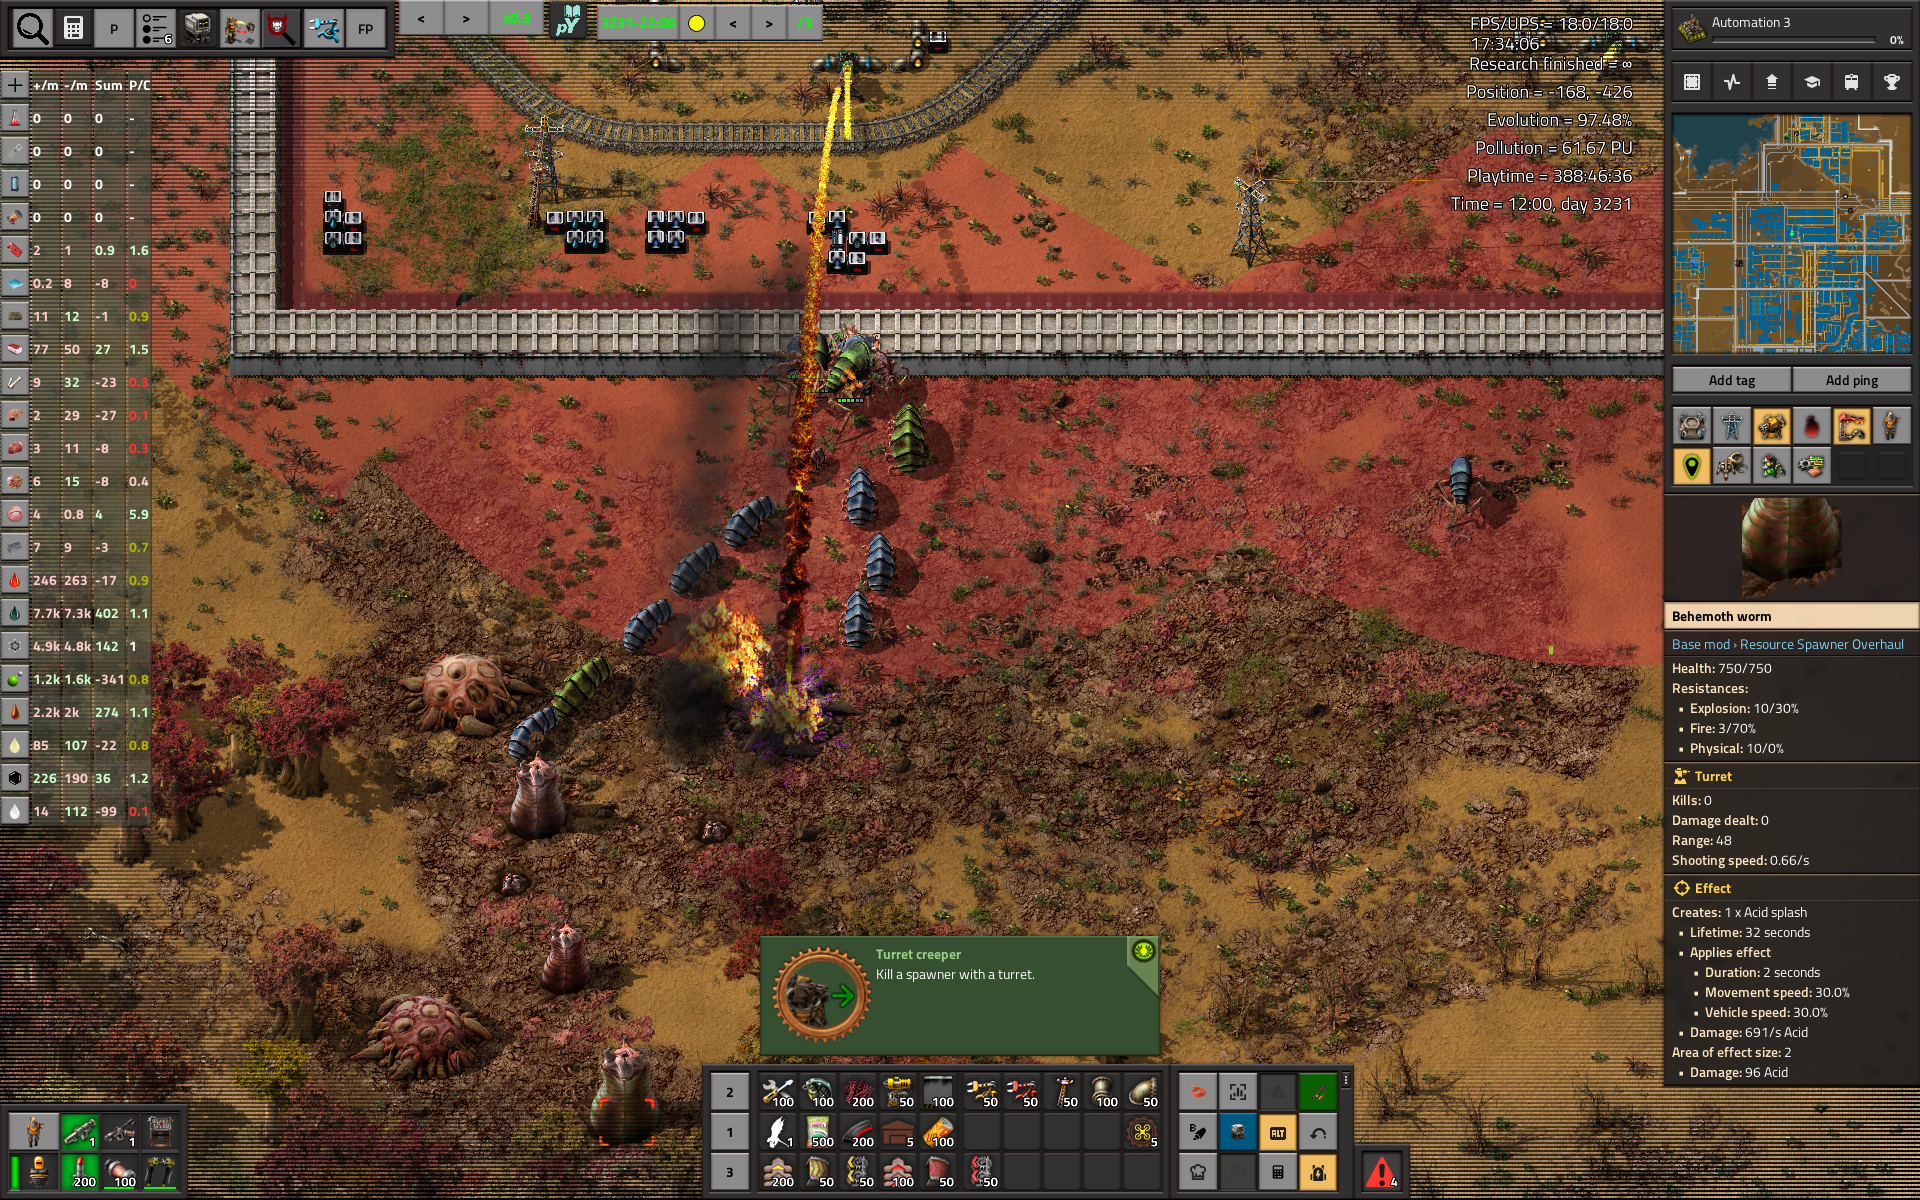 biters_settling_in_range_of_flame_turrets.png